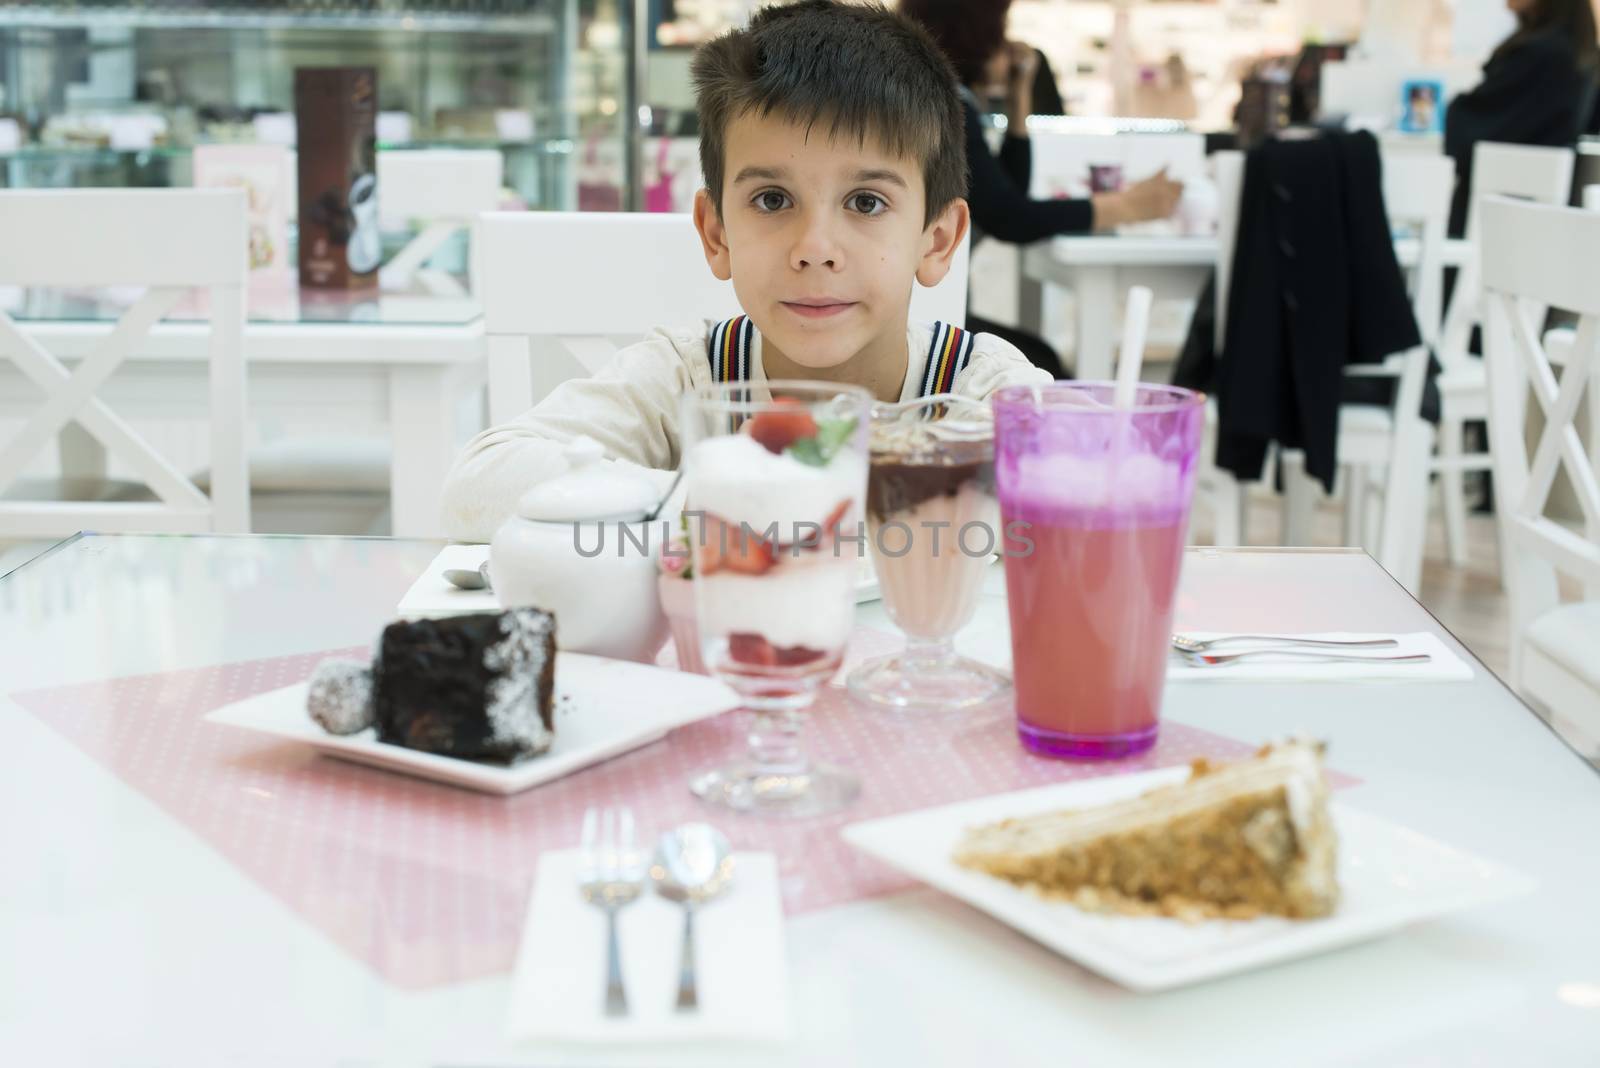 Cake and a milkshake in confectionery. Child on a table